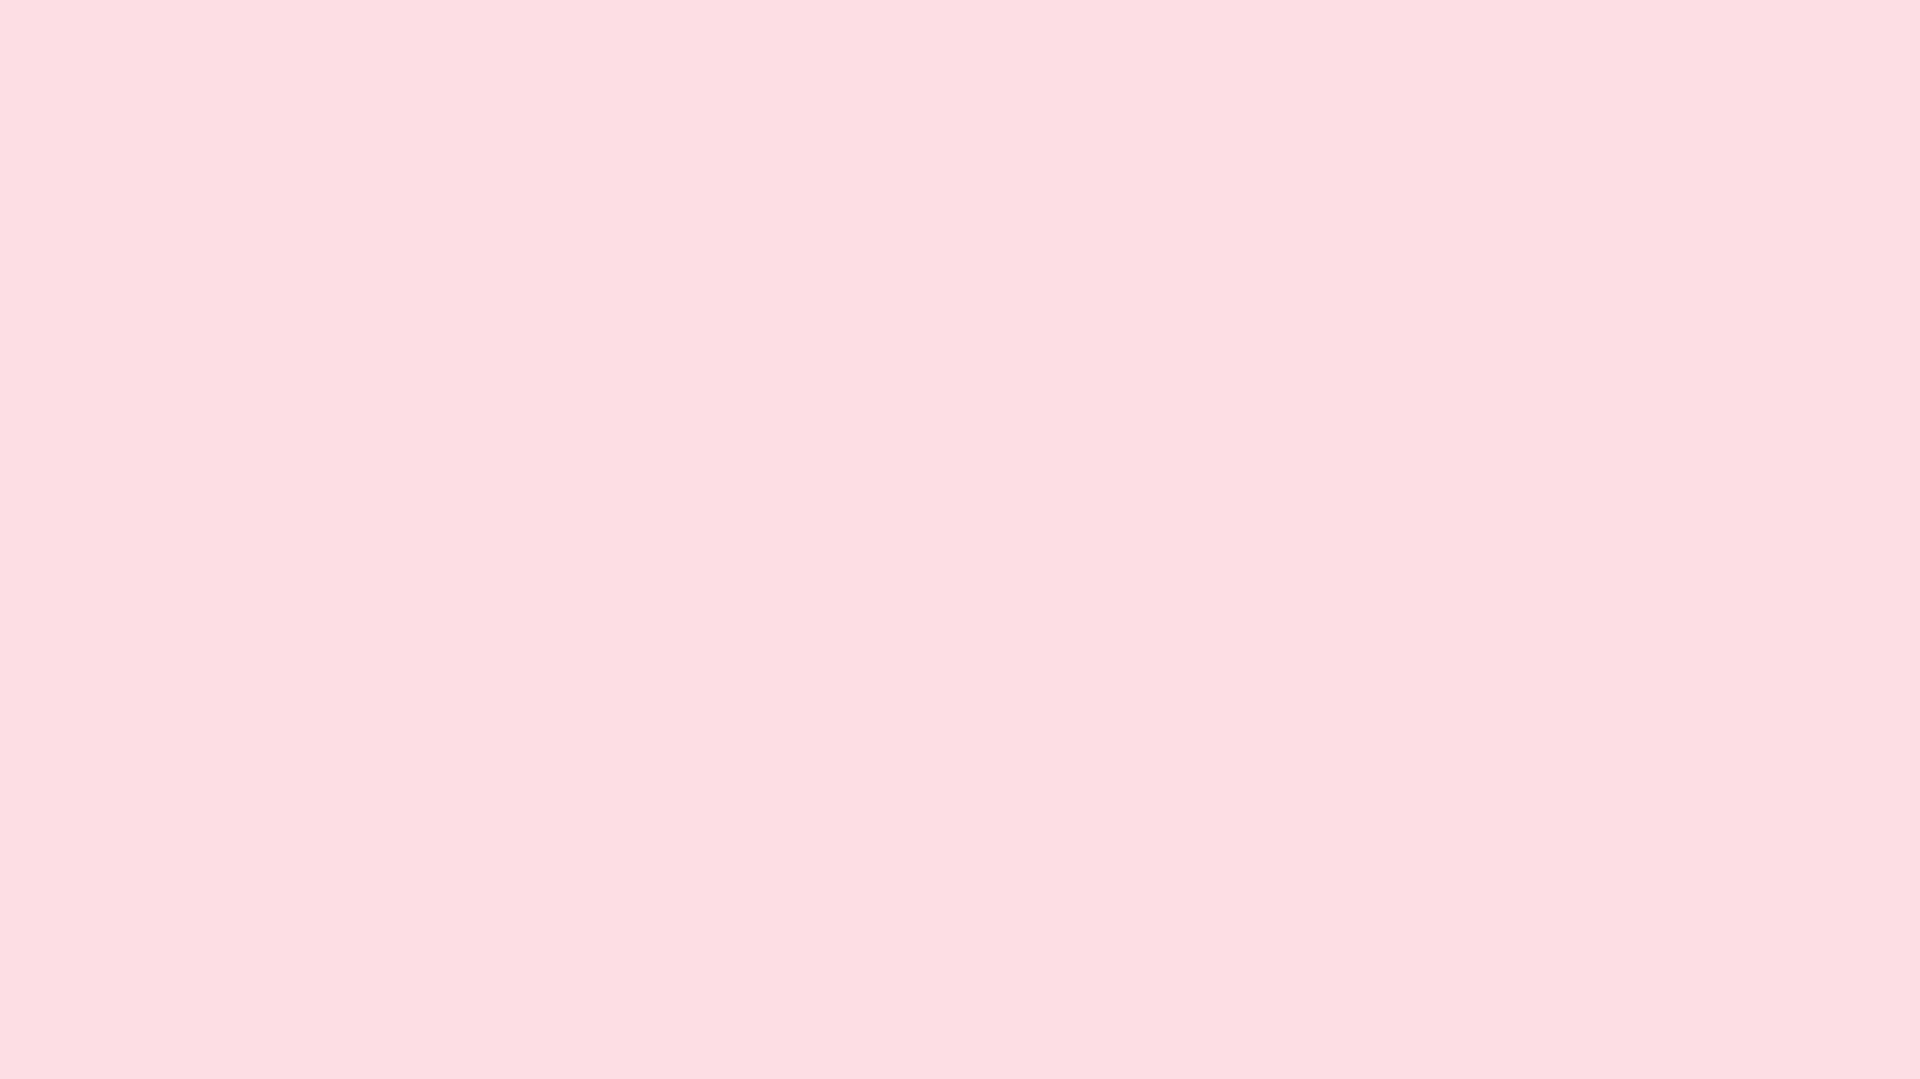 A Pink Background With White Line Wallpaper